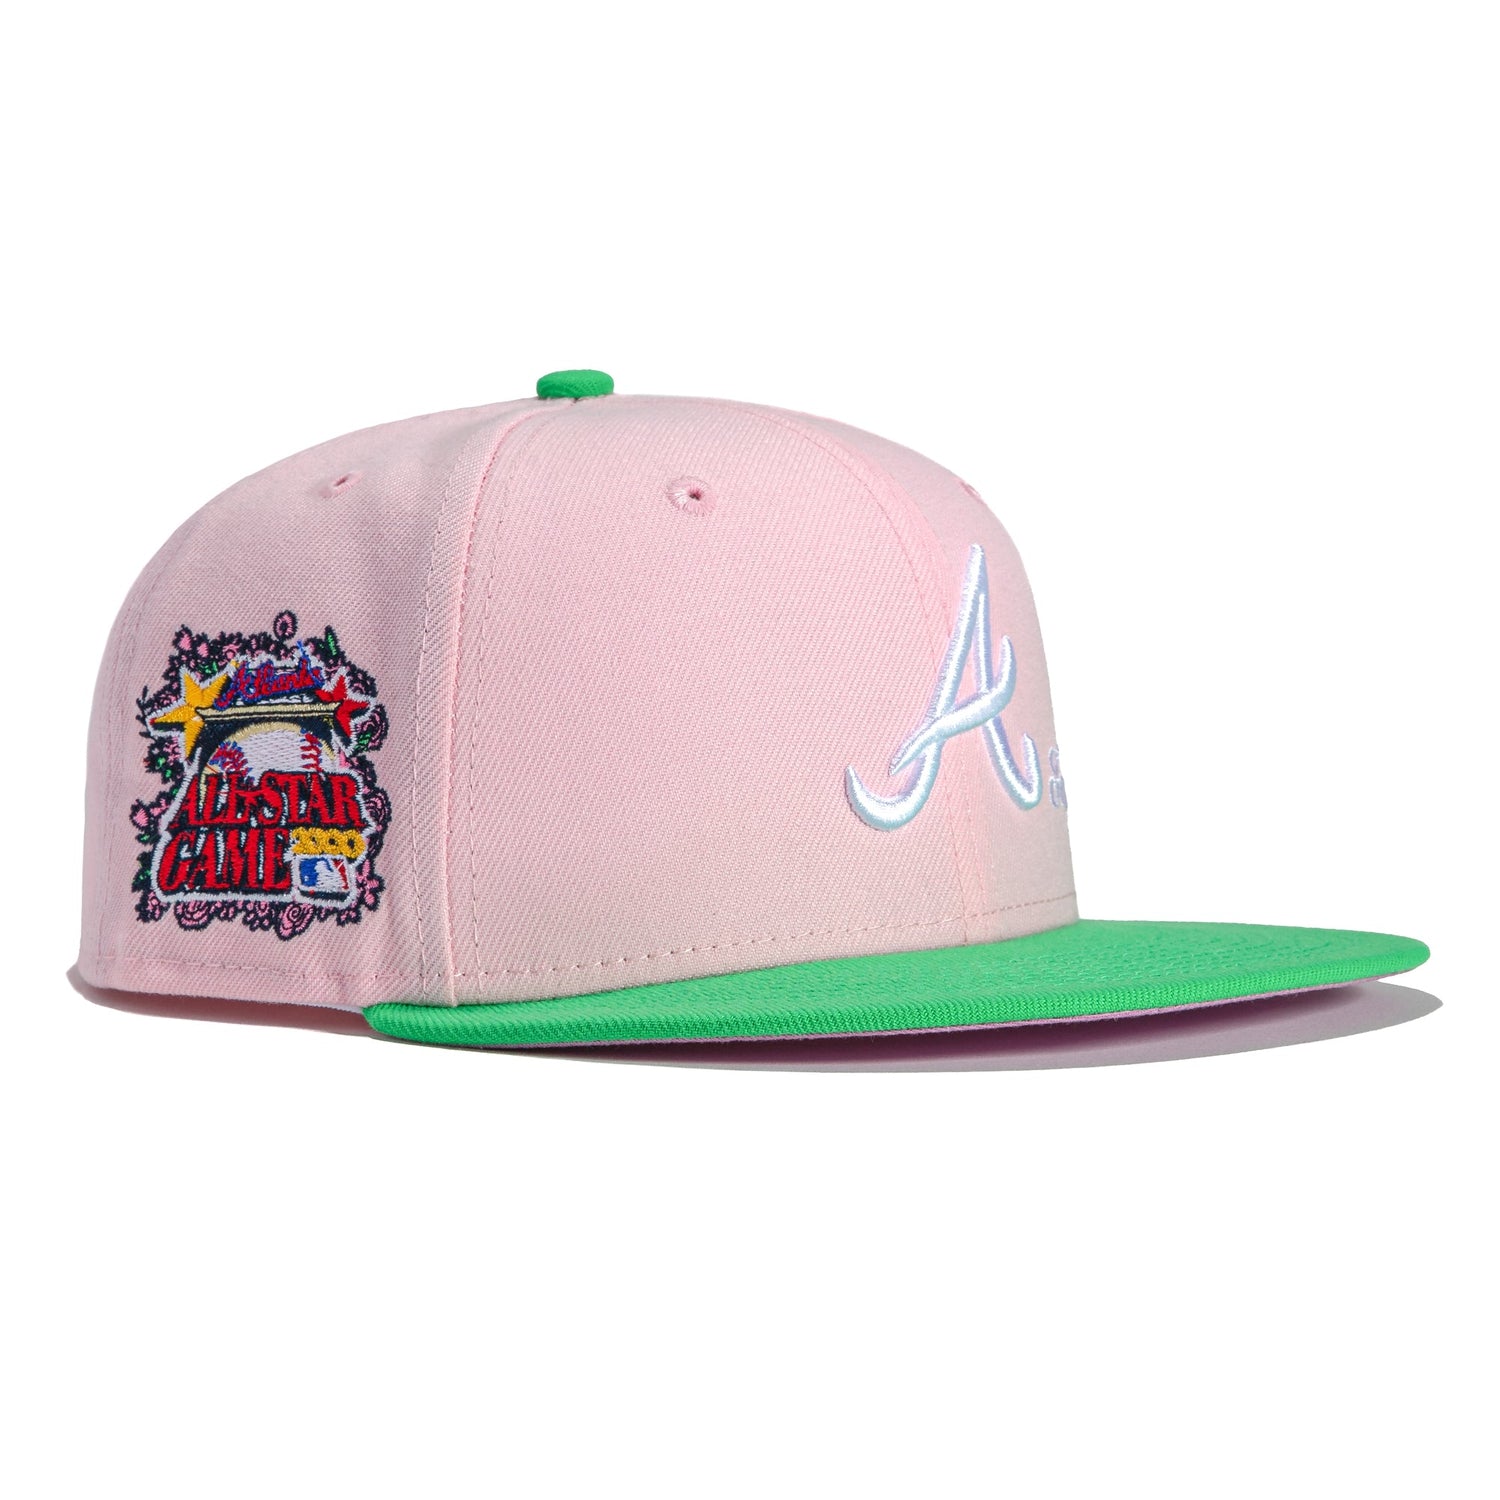 New Era 59FIFTY Jae Tips Forever Atlanta Braves 2000 All Star Game Patch Hat - Pink, Lime Green Pink/Lime Green / 7 7/8